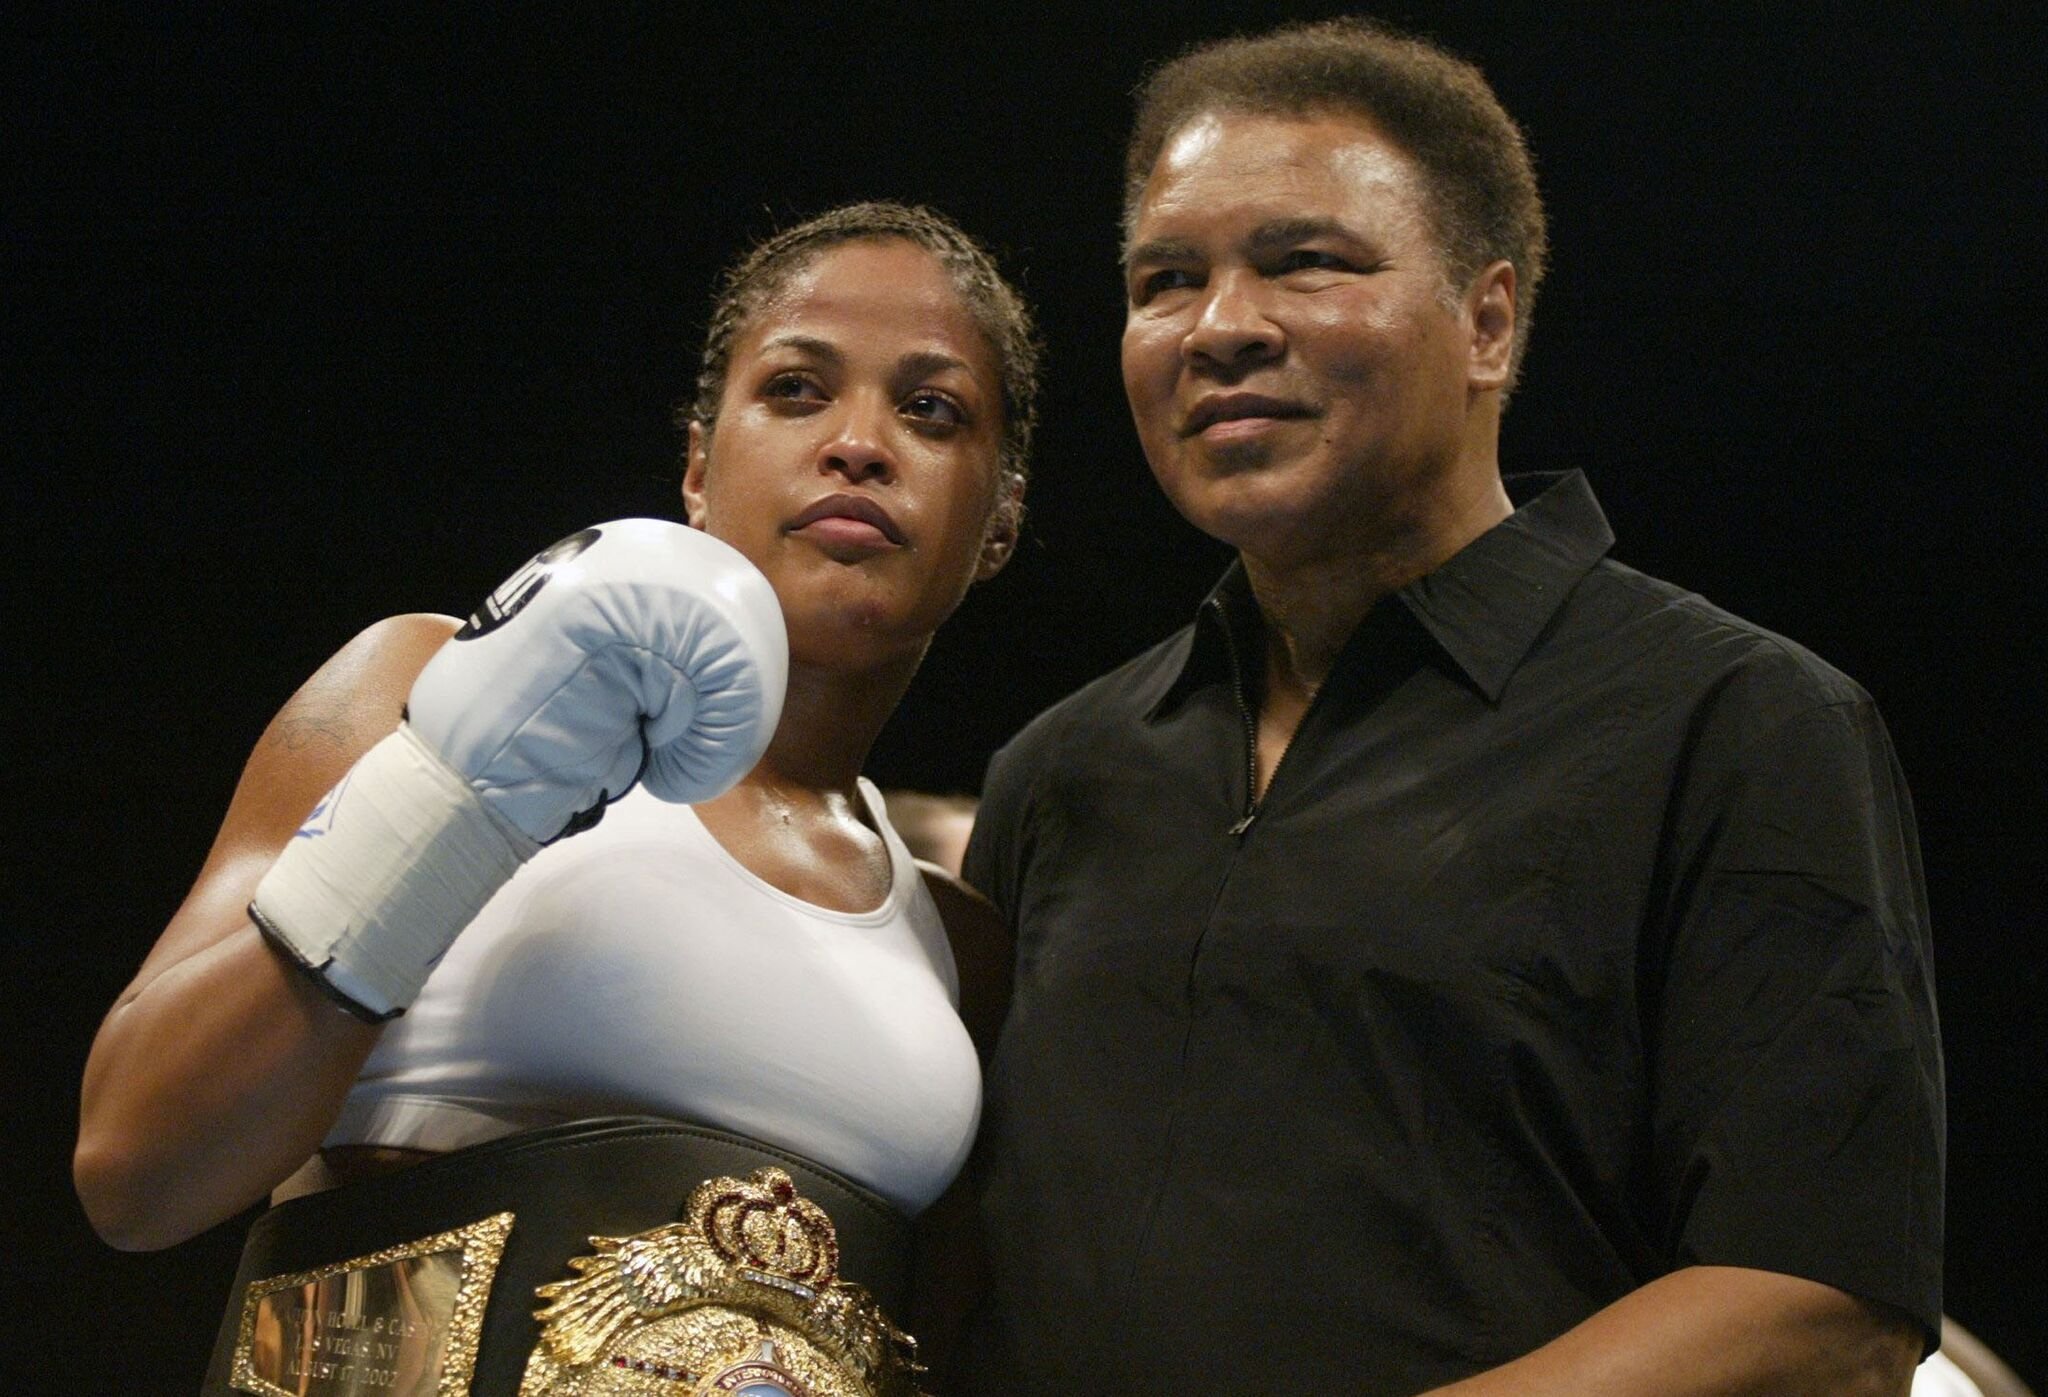 Female boxer Laila Ali poses with her father, former boxer, Muhammad Ali, after defeating Suzy Taylor after two rounds at the Aladdin Casino on August 17, 2002 | Photo: Getty Images